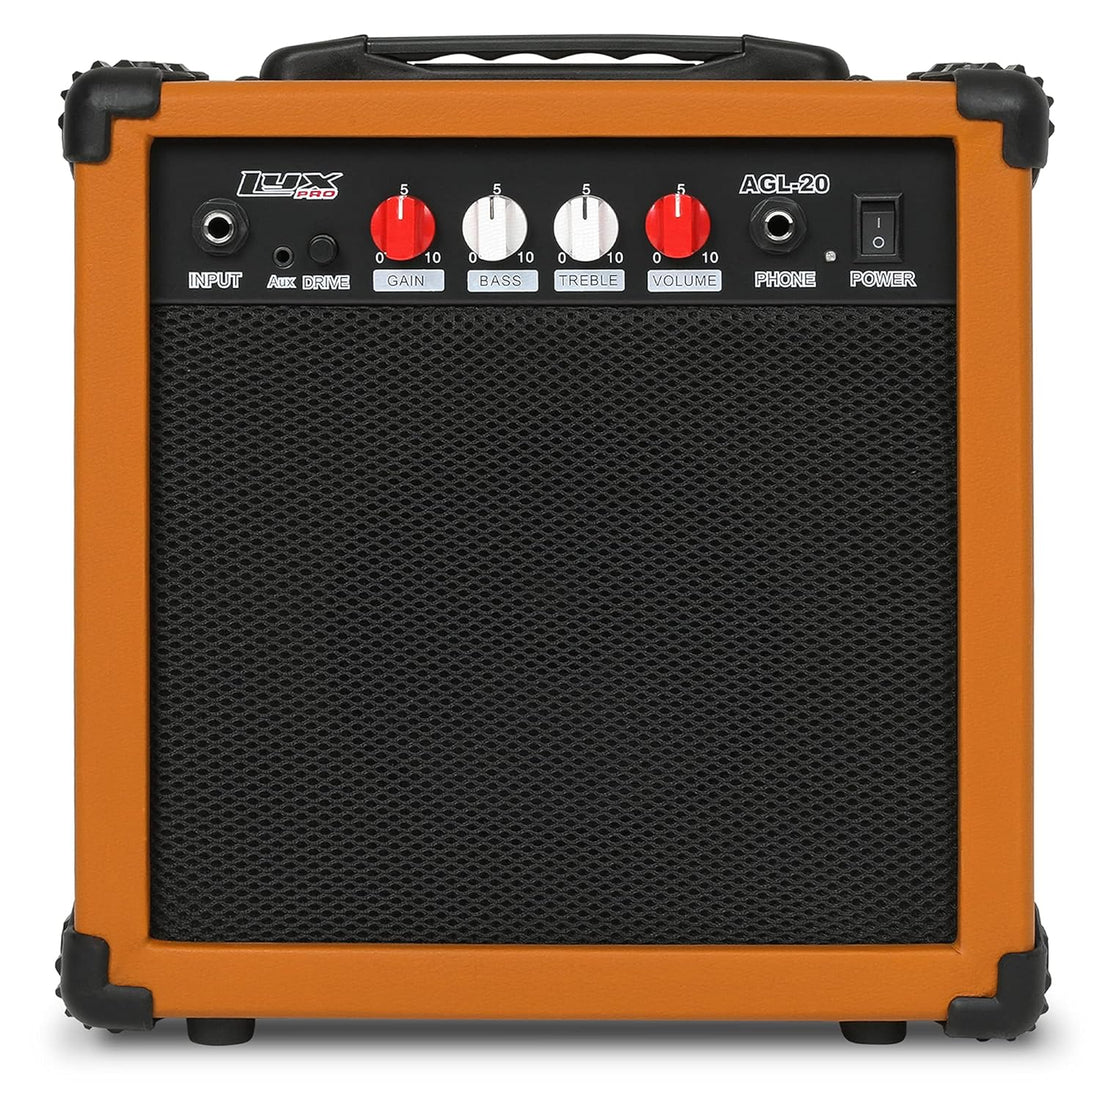 LyxPro Electric Guitar Amp 20 Watt Amplifier Built in Speaker Headphone Jack and Aux Input Includes Gain Bass Treble Volume and Grind - Mahogany